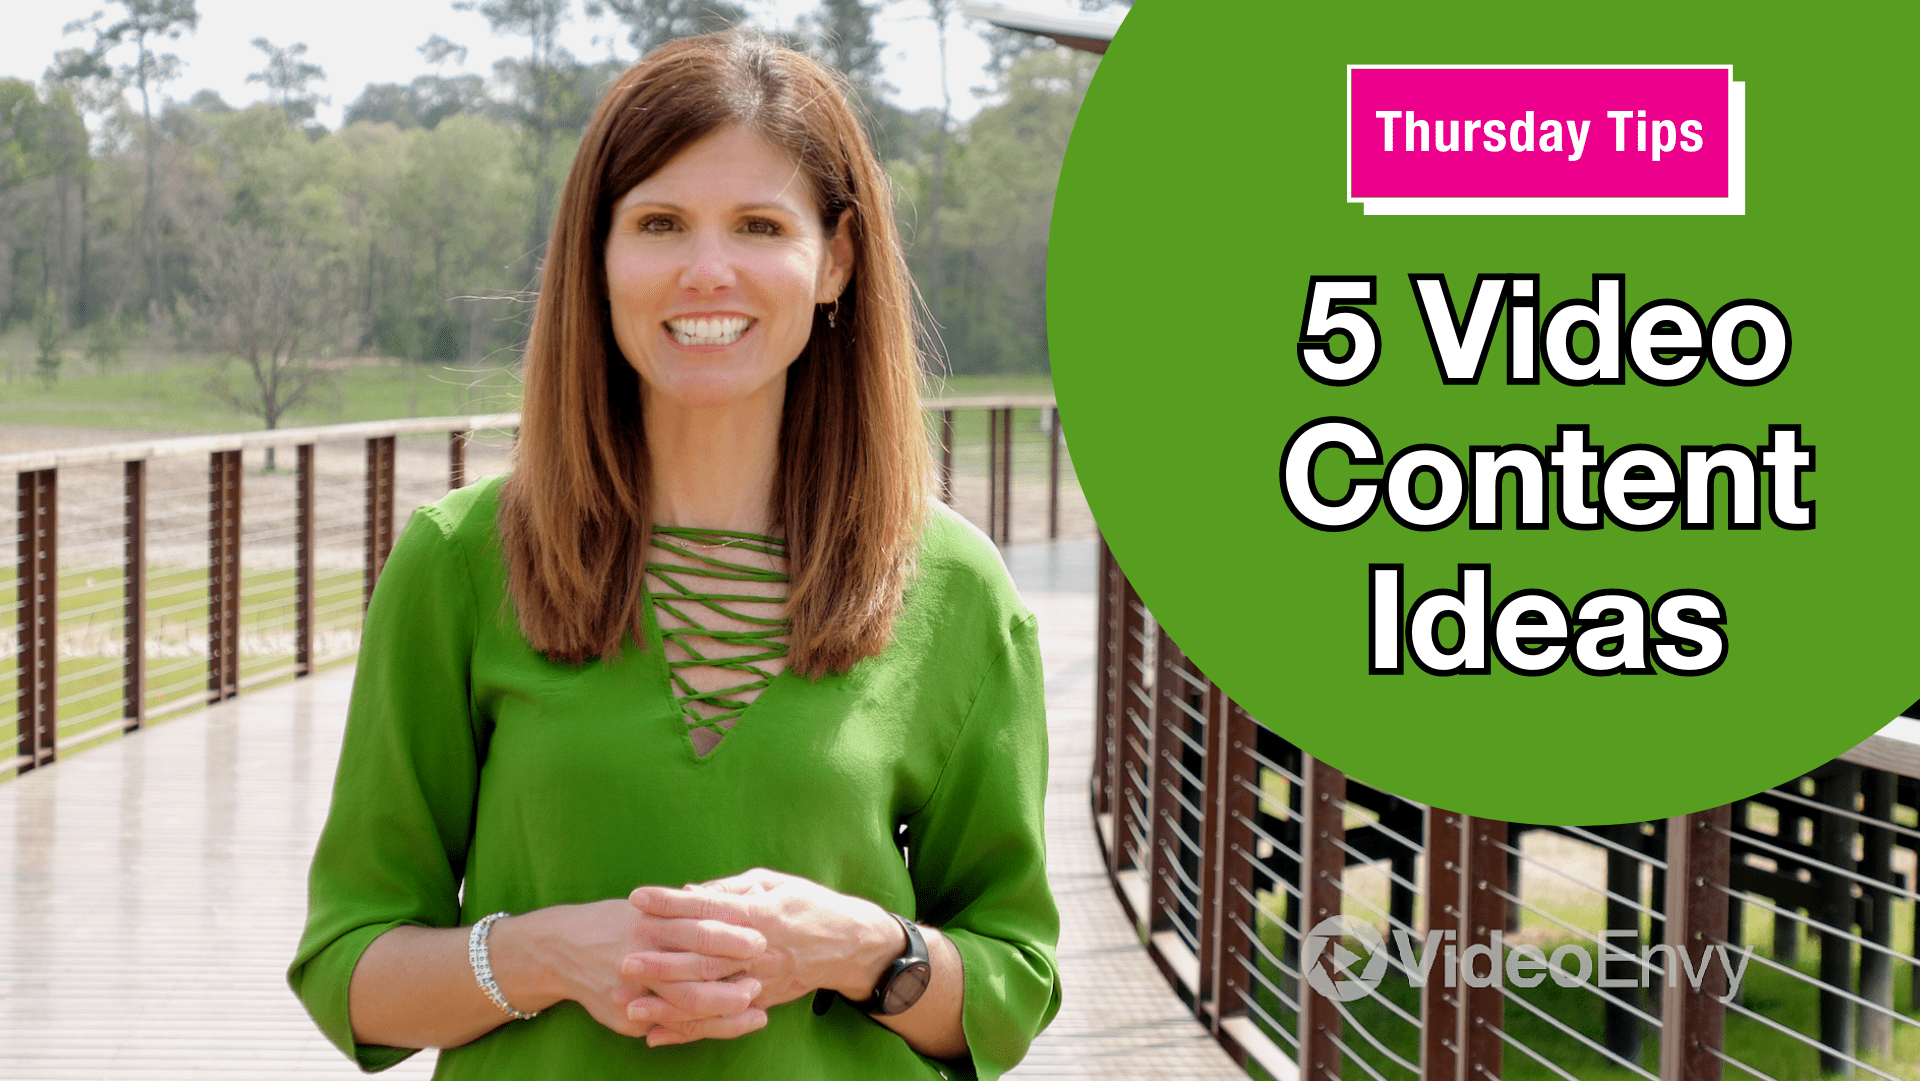 Thursday Tips: 5 Ideas for Video Content